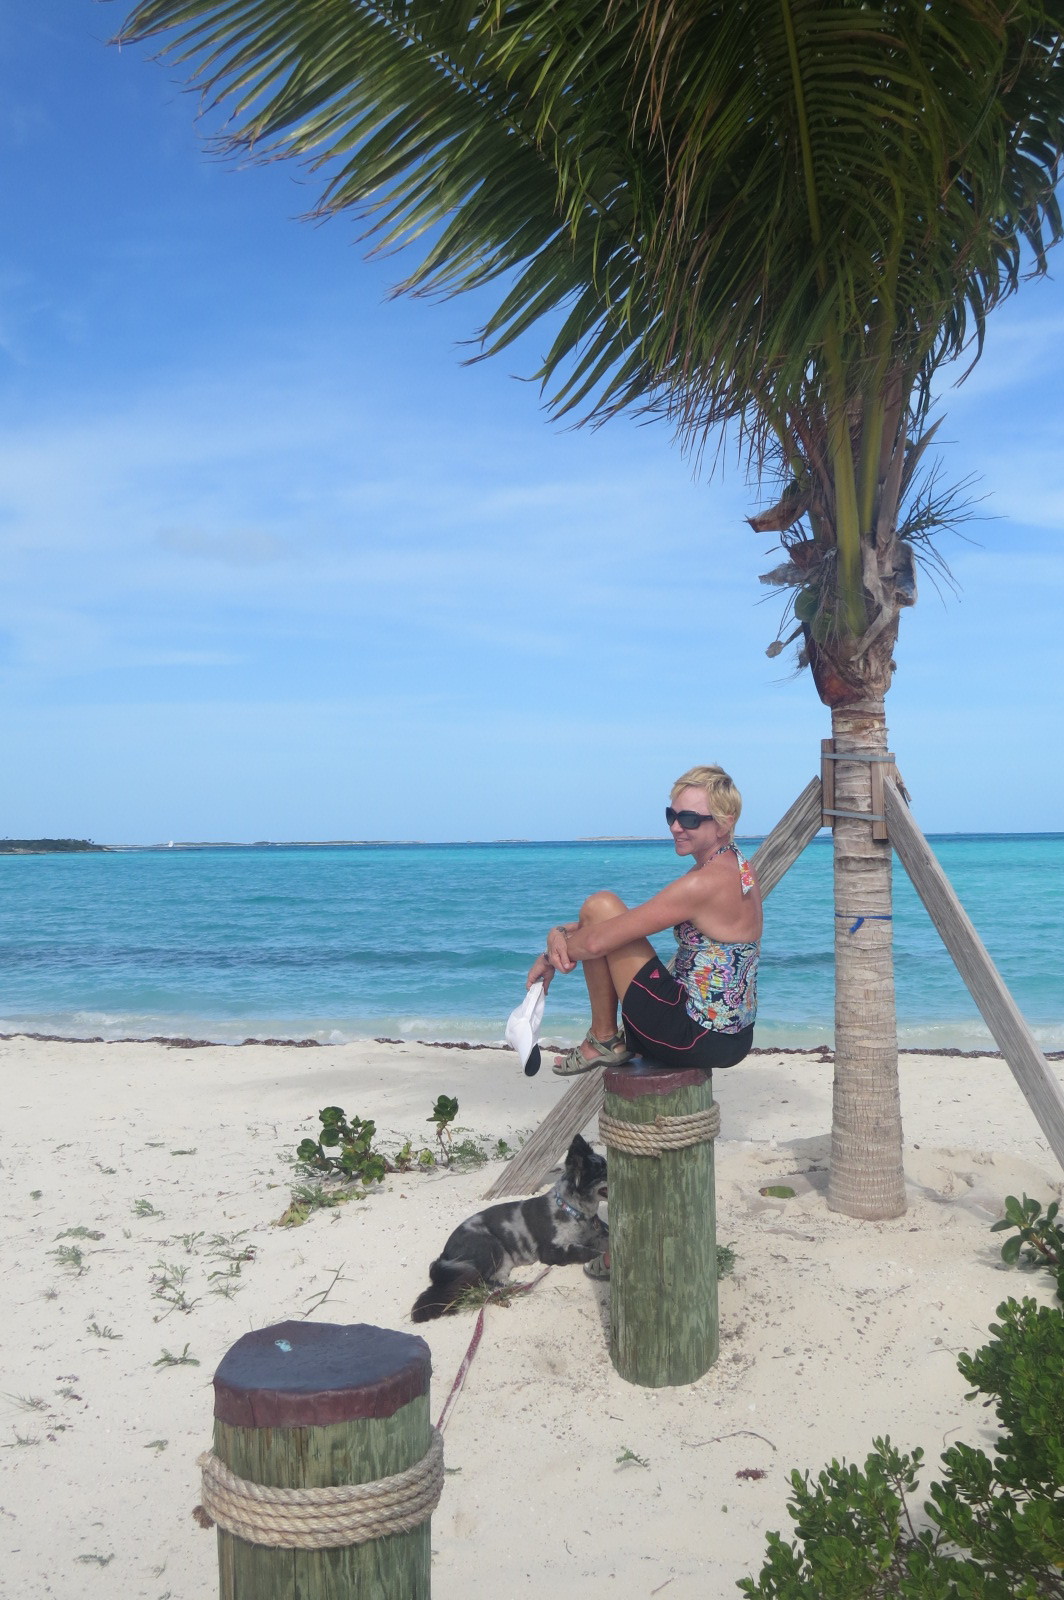 Pondering the beauty of Highbourne Cay